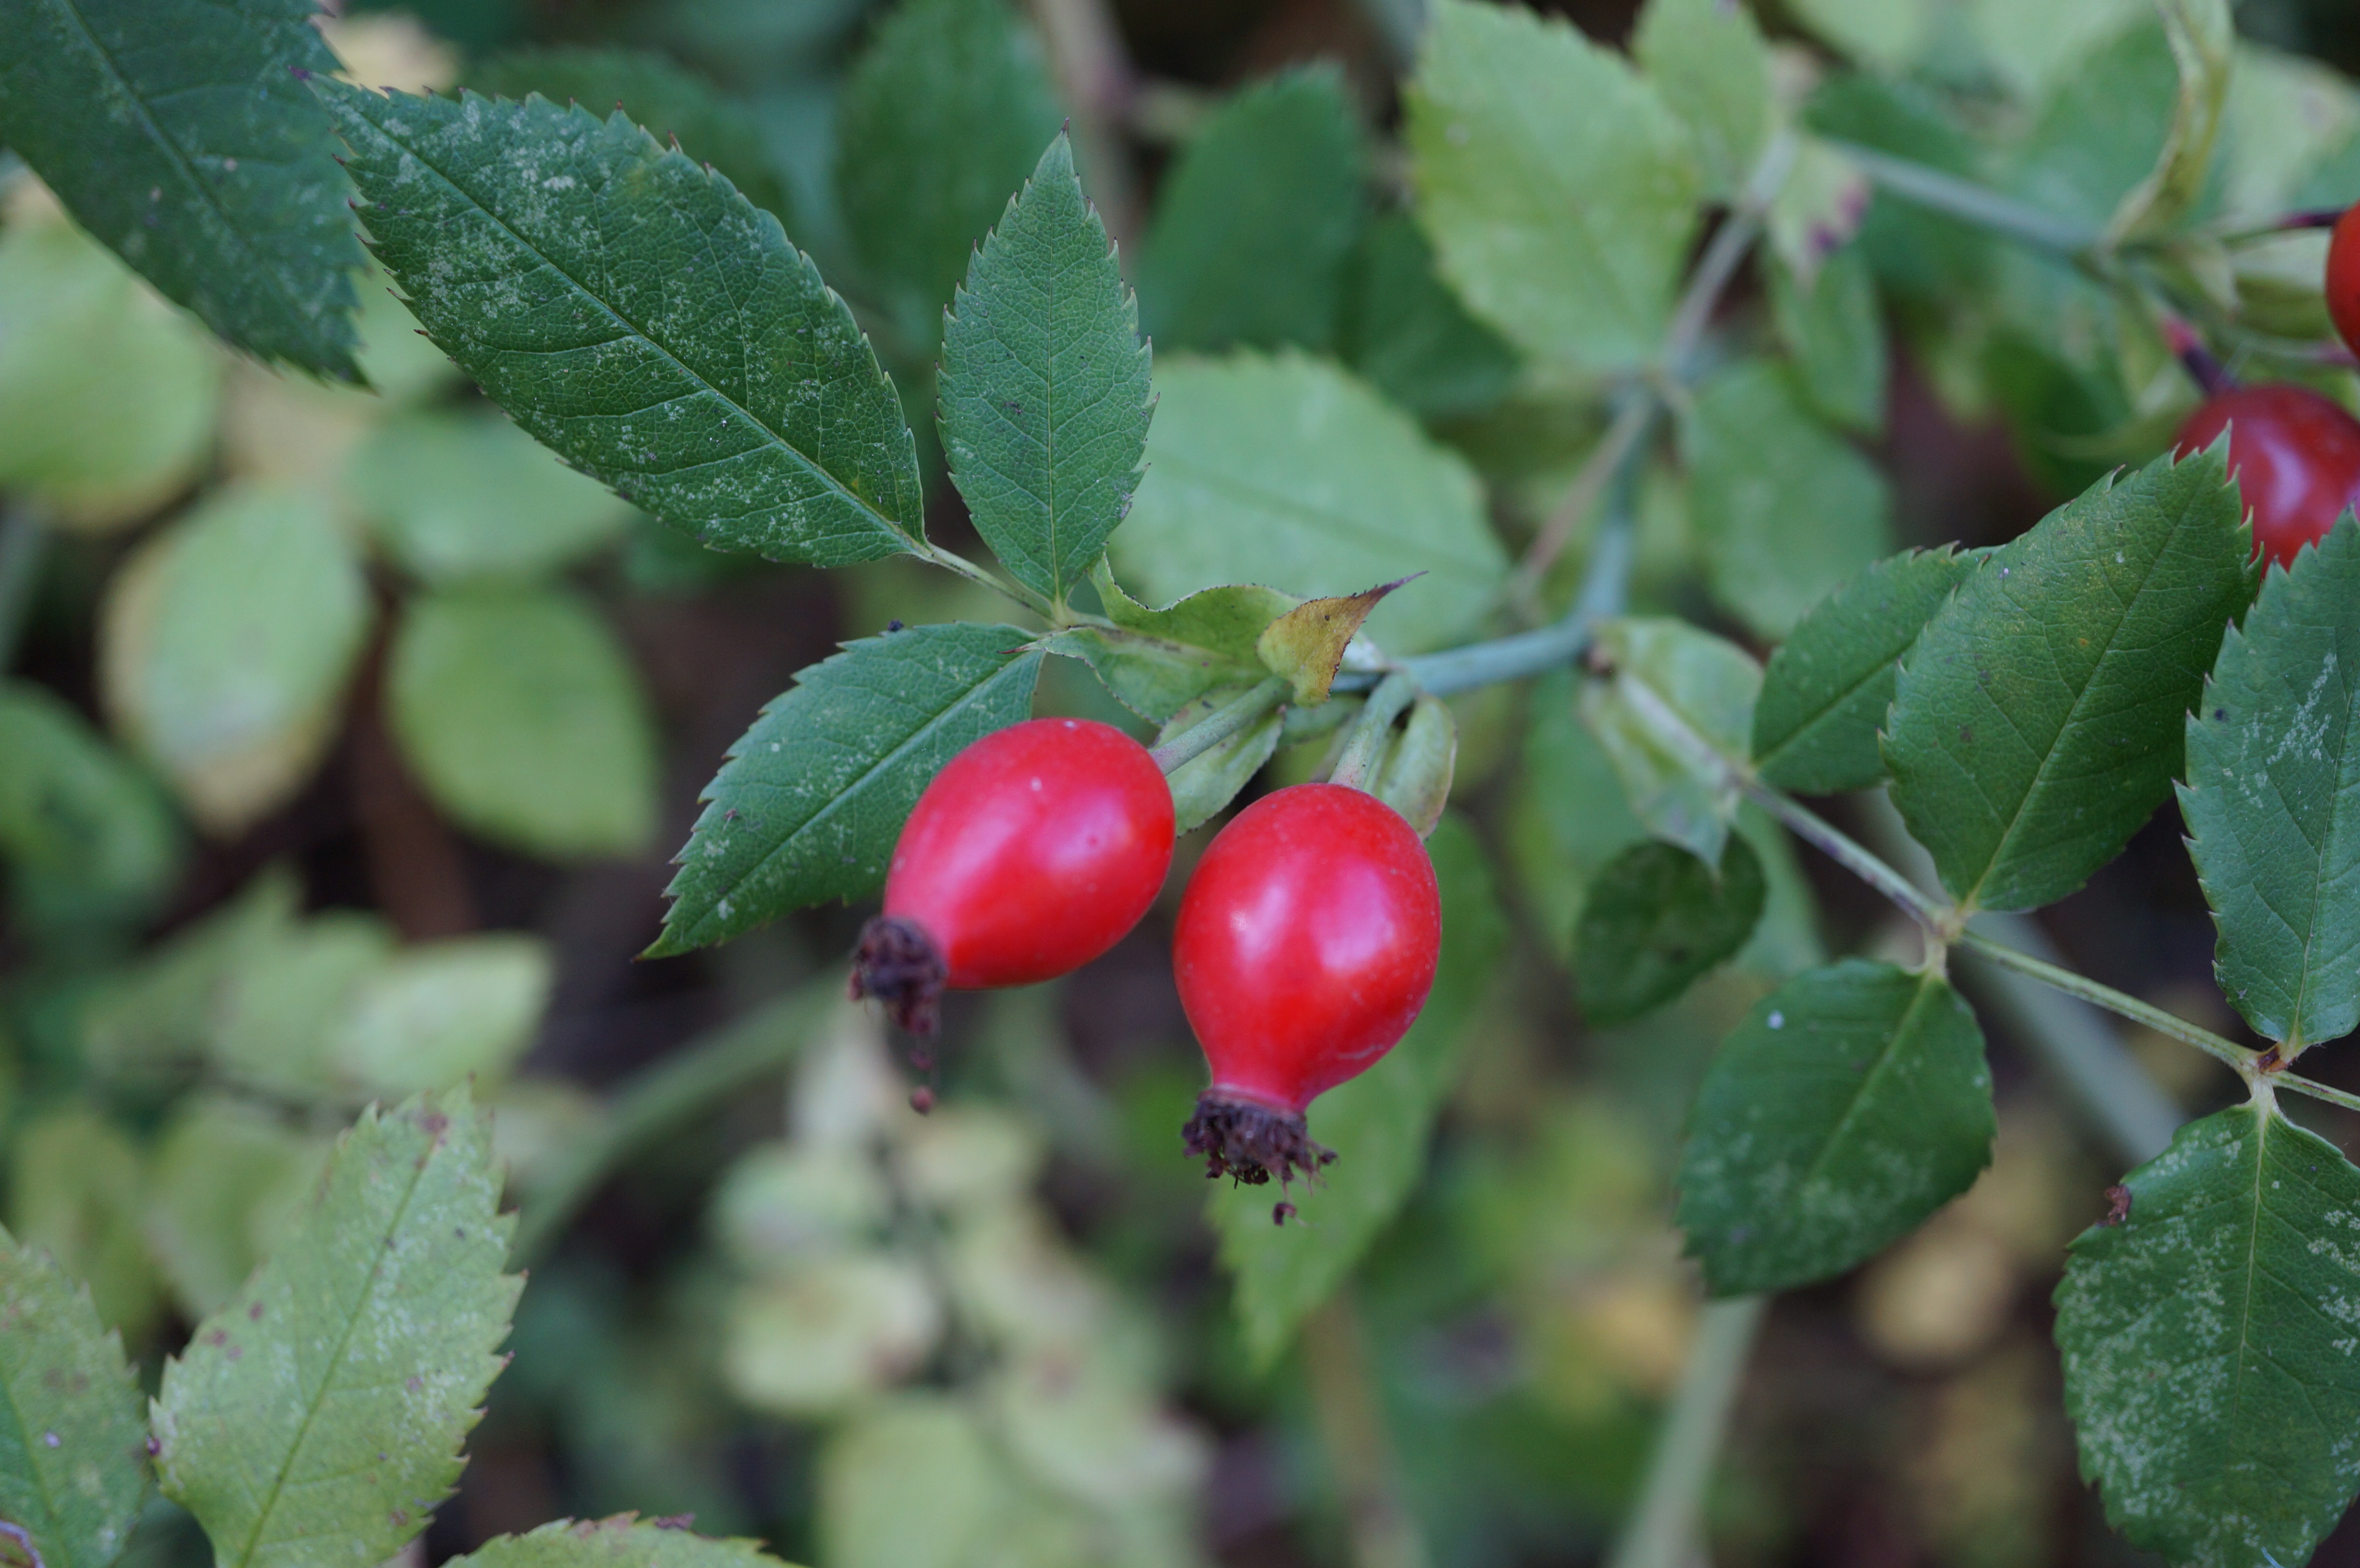 Rosehips in the fall 